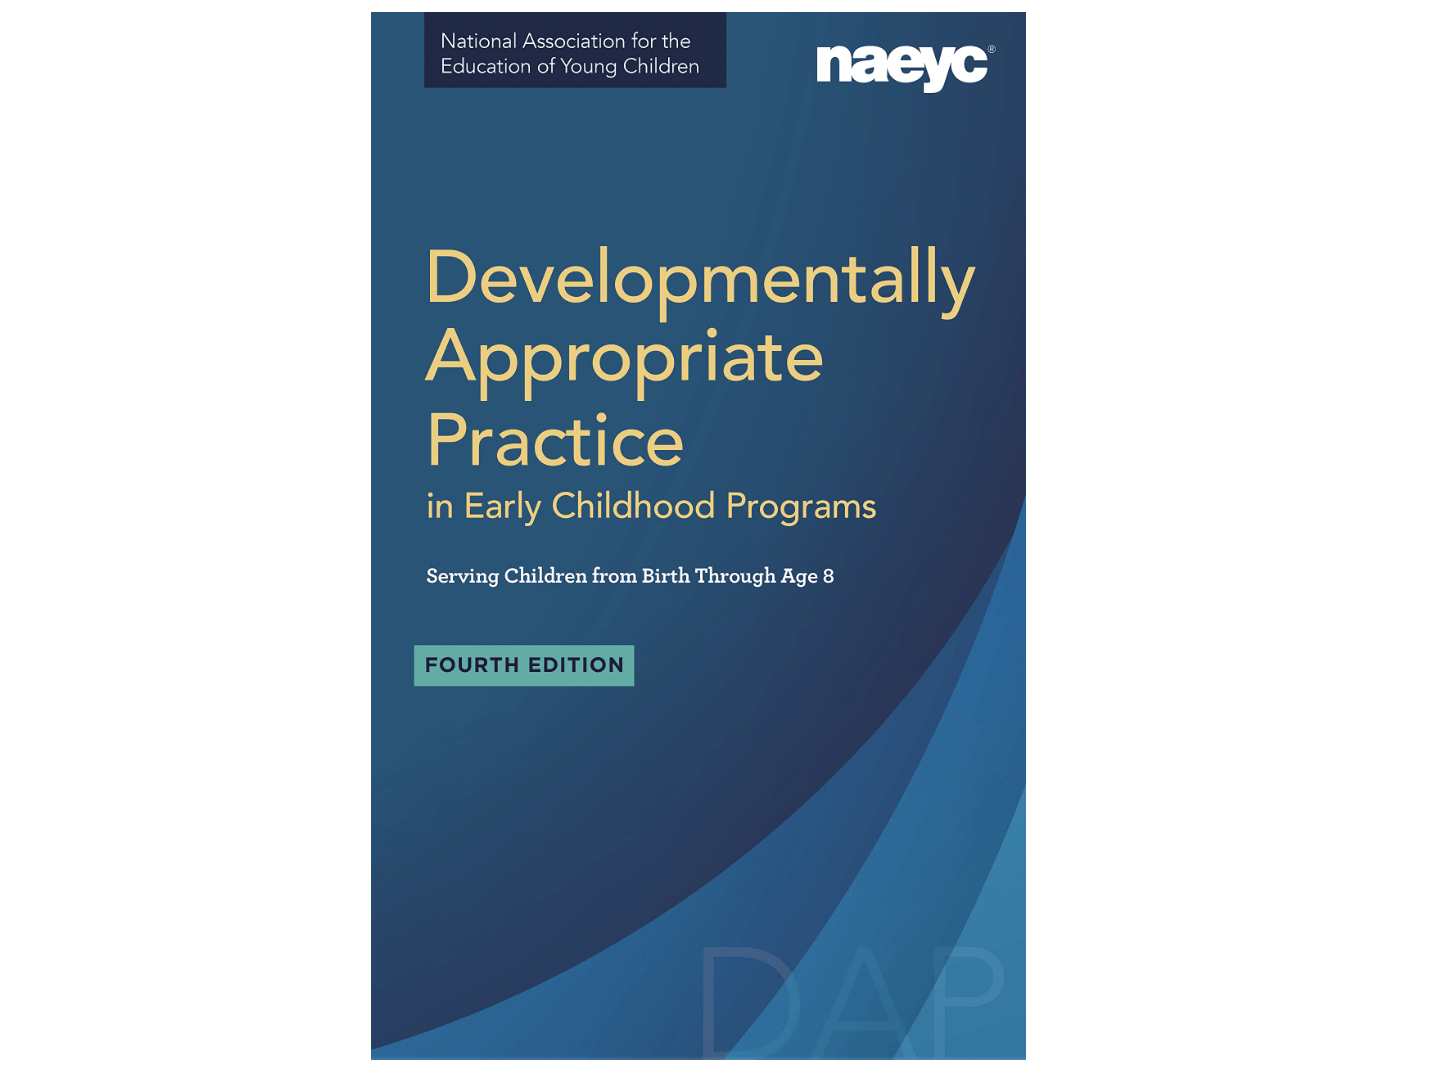 National Association for the Education of Young Children (NAEYC) Developmentally Appropriate Practice Book, 4th edition.